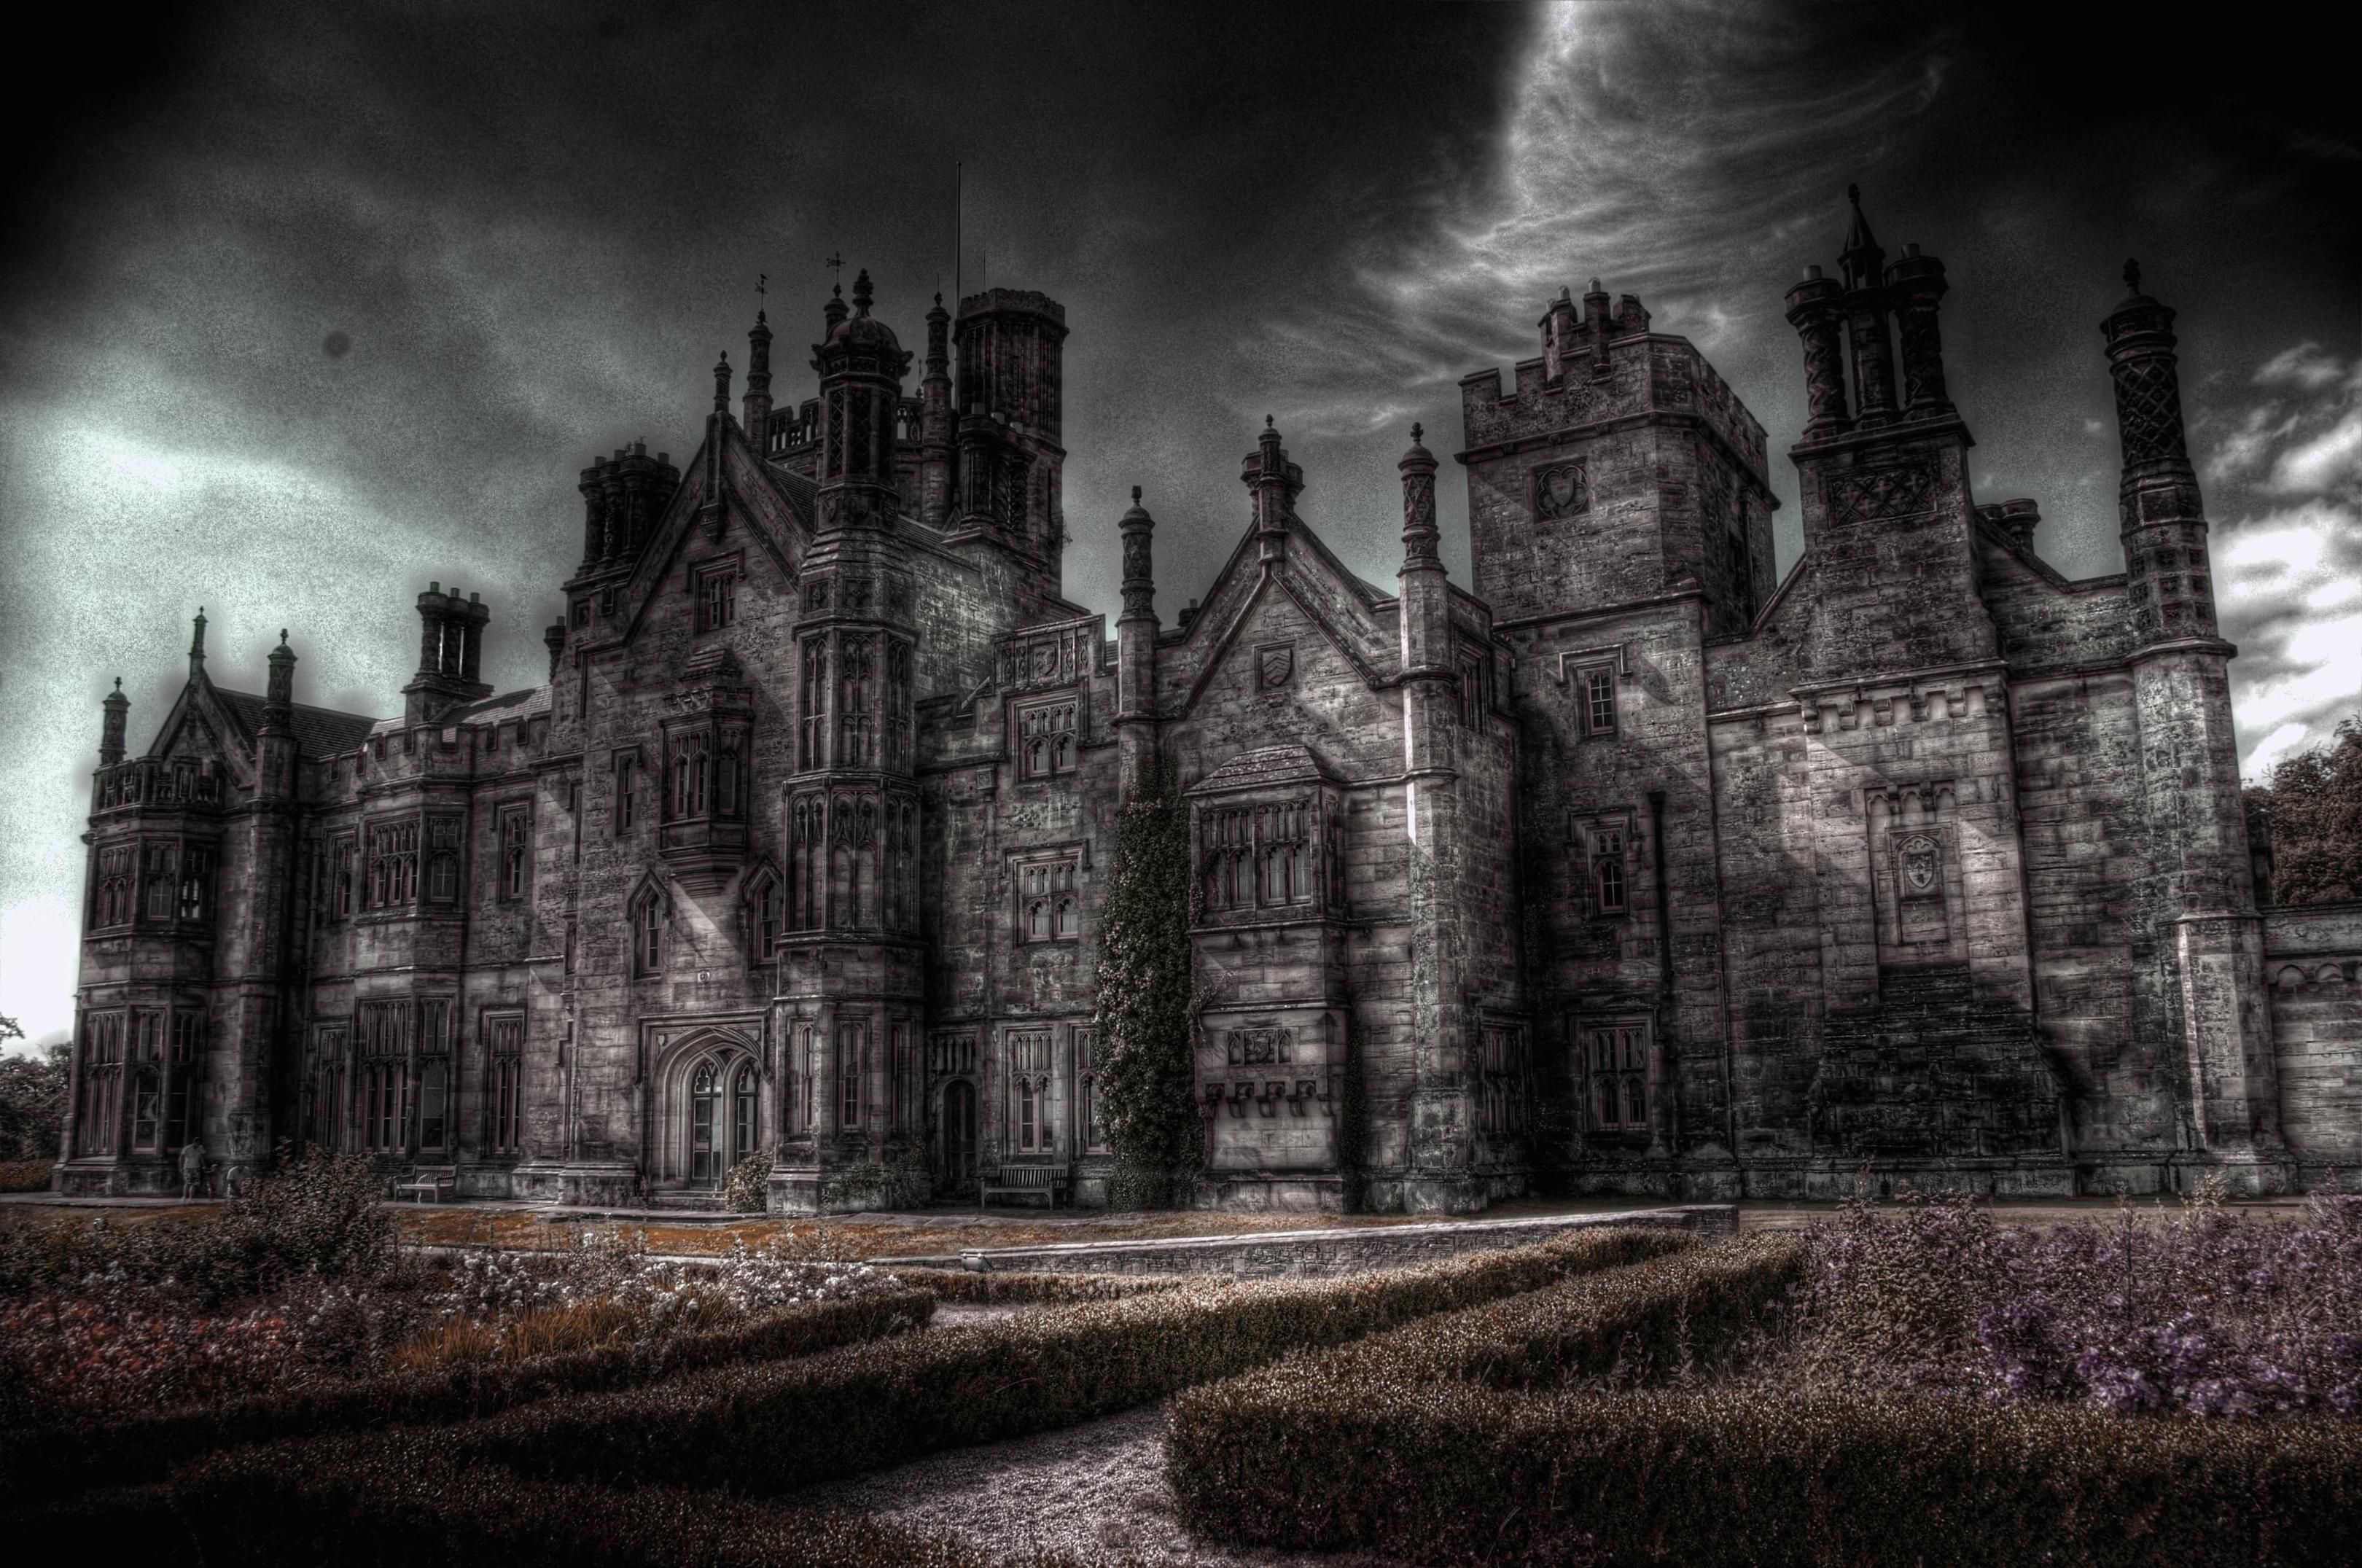 Gothic Art Galleries HD Wallpaper Res 3600x2390PX Wallpaper. Gothic castle, Gothic architecture, Gothic mansion